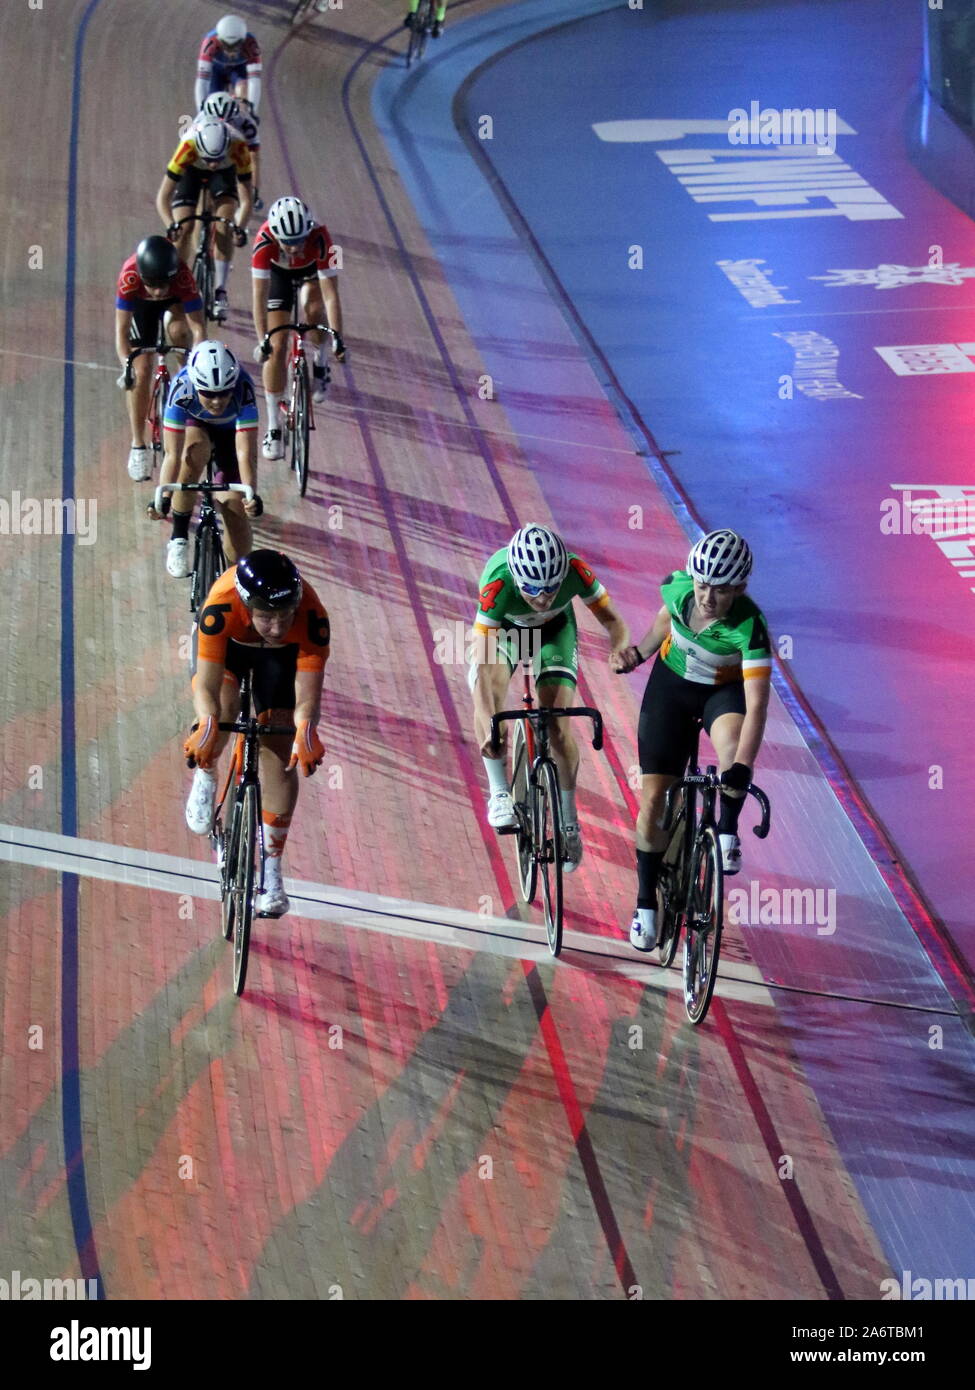 Lee Valley Velodrome - LONDON, UK. 27th October 2019. Women's Final Chase (20km) during day 6 of the Six Day London cycling event. Stock Photo